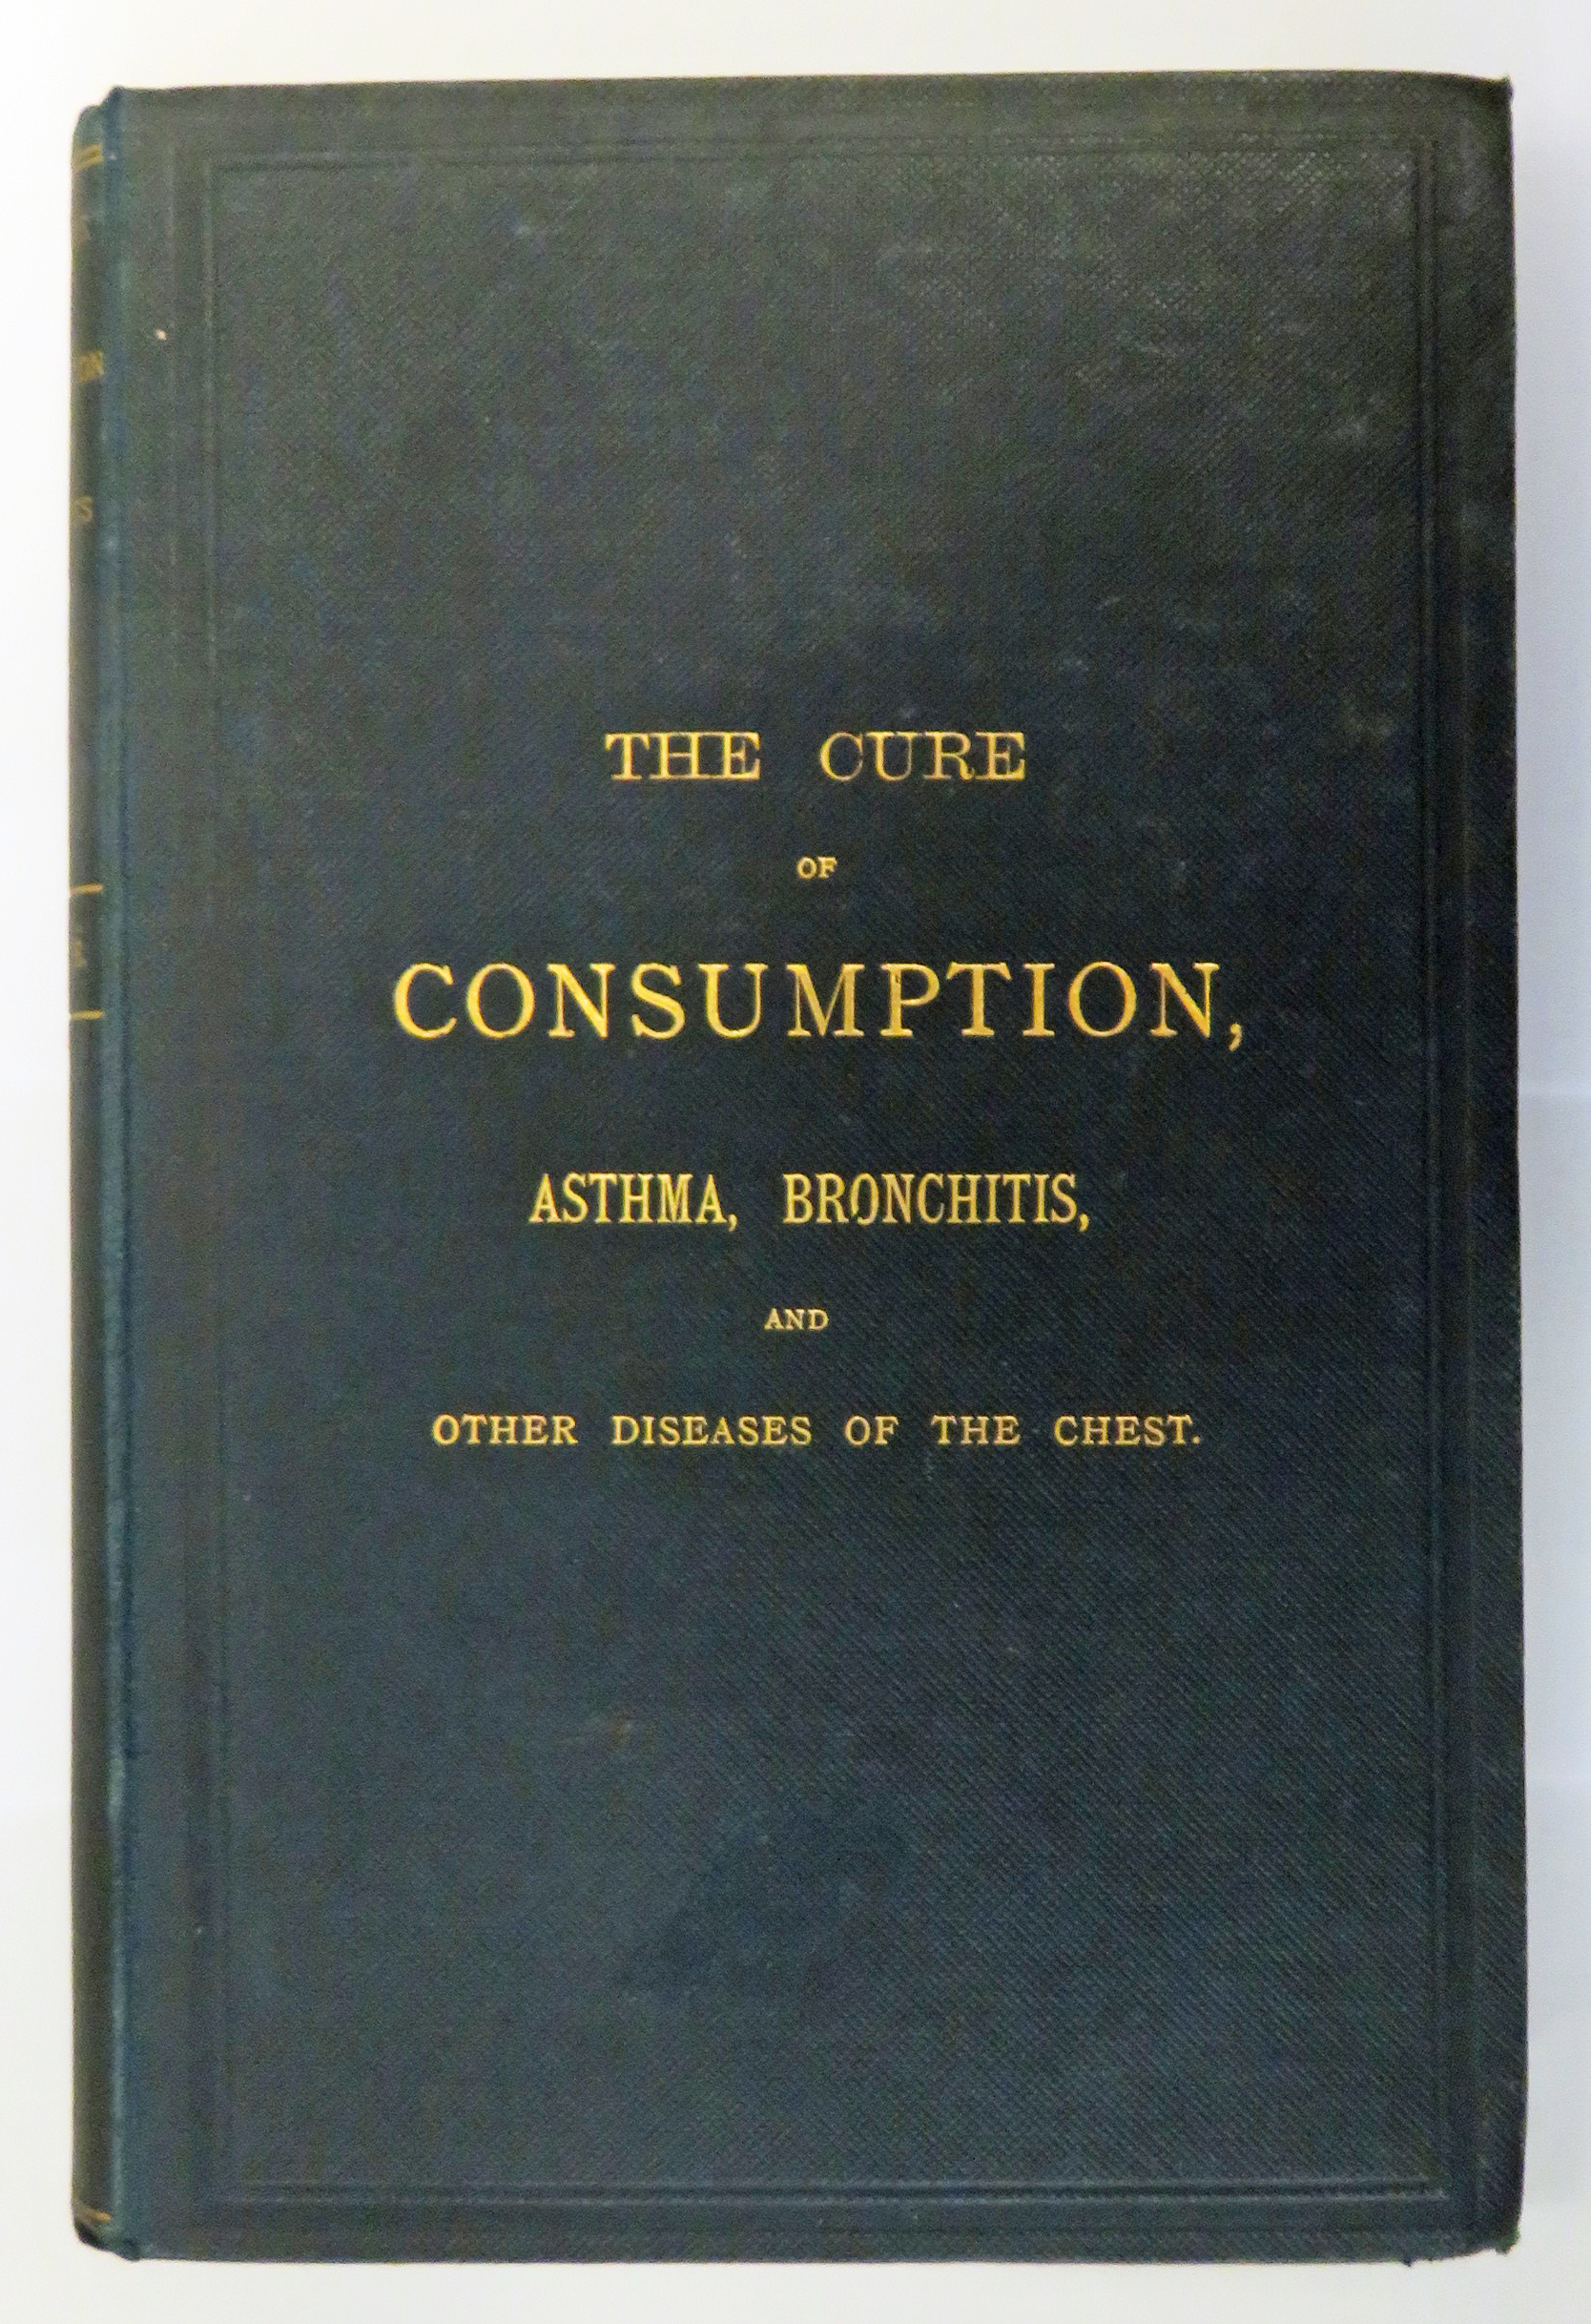 The Cure of Consumption, Asthma, Bronchitis, and Other Diseases of the Chest